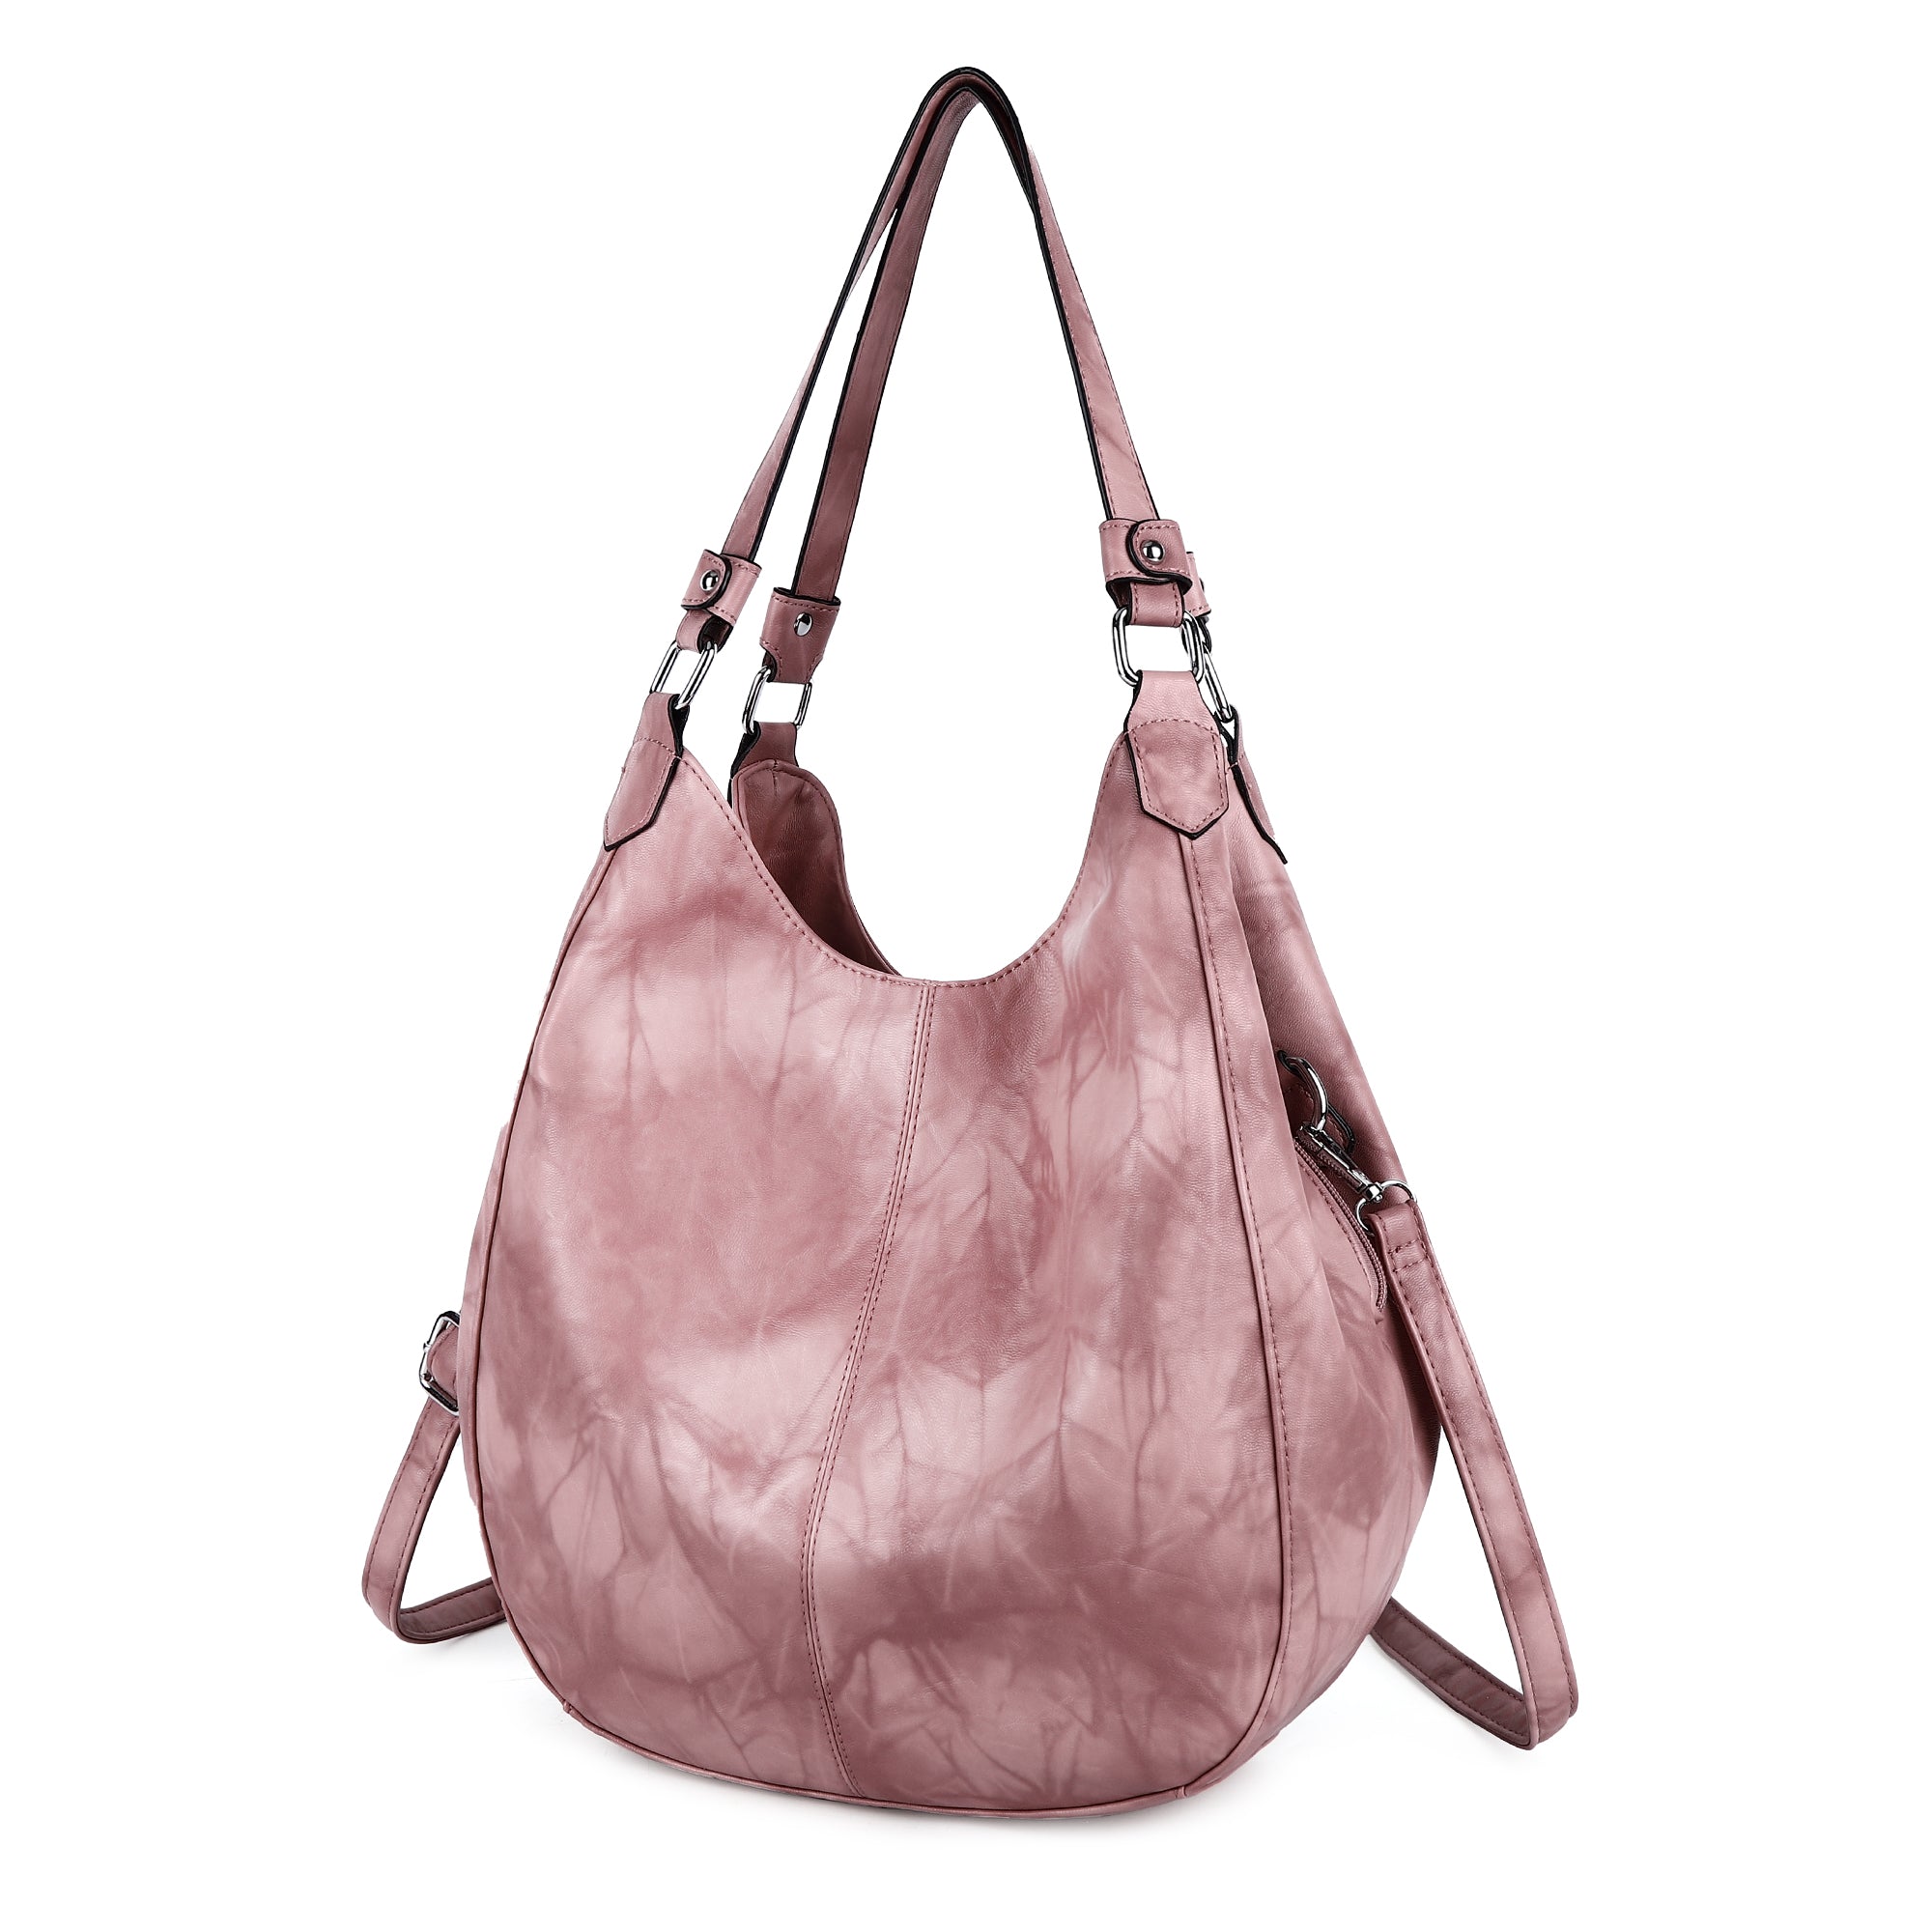 Ladysky Private Label Candy Single-Shoulder Crossbody Ladi Bags